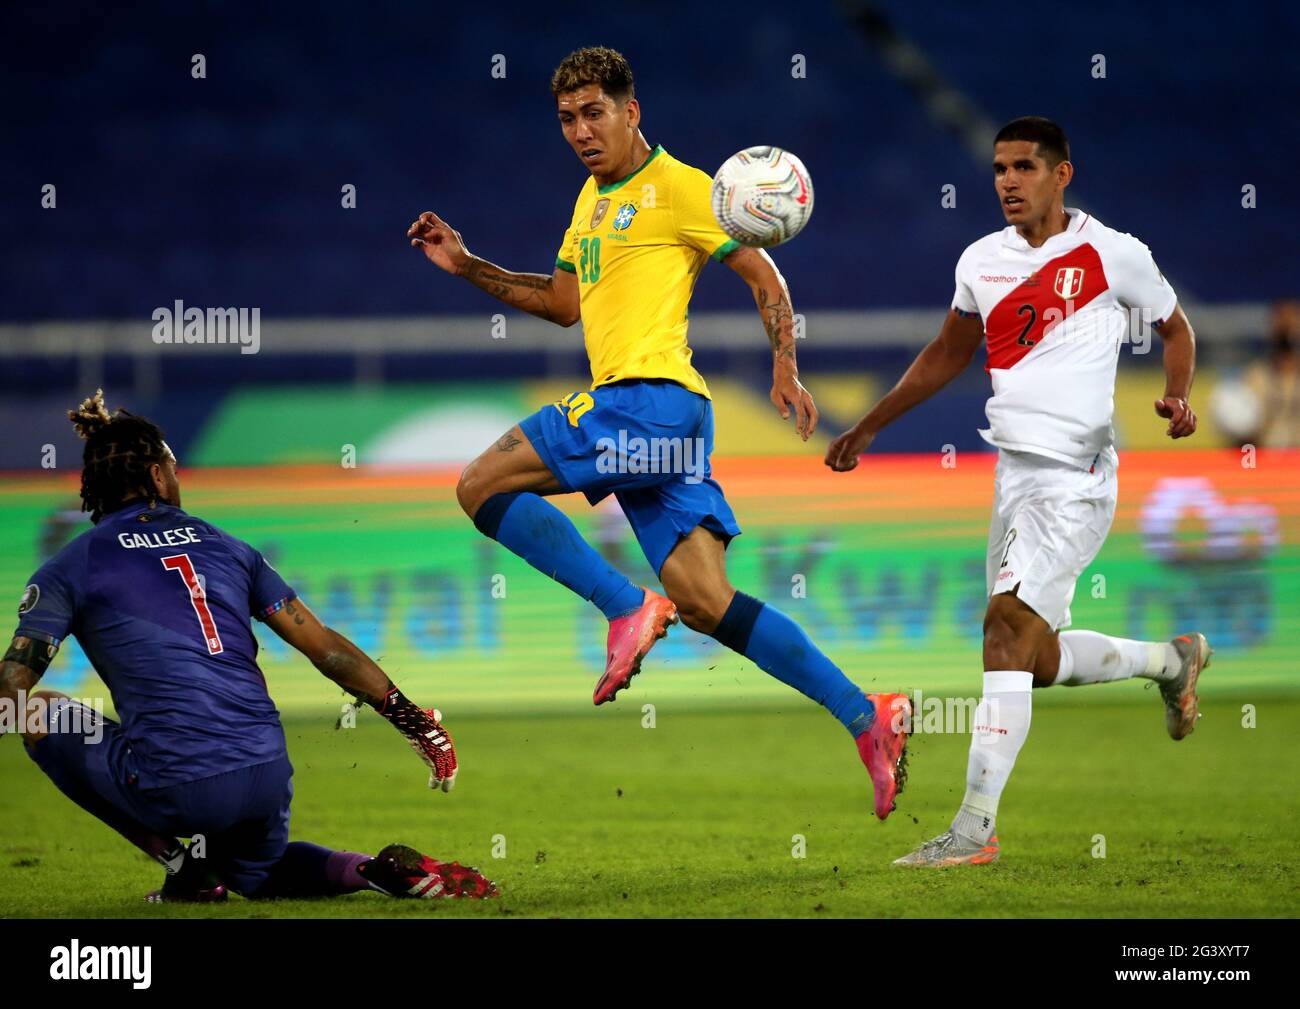 RIO DE JANEIRO, BRAZIL - JUNE 17: : Roberto Firmino of Brazil competes for the ball with Luis Abram and Pedro Gallese of Peru ,during the match between Brazil and Peru as part of Conmebol Copa America Brazil 2021 at Estadio Olímpico Nilton Santos on June 17, 2021 in Rio de Janeiro, Brazil. (Photo by MB Media) Stock Photo